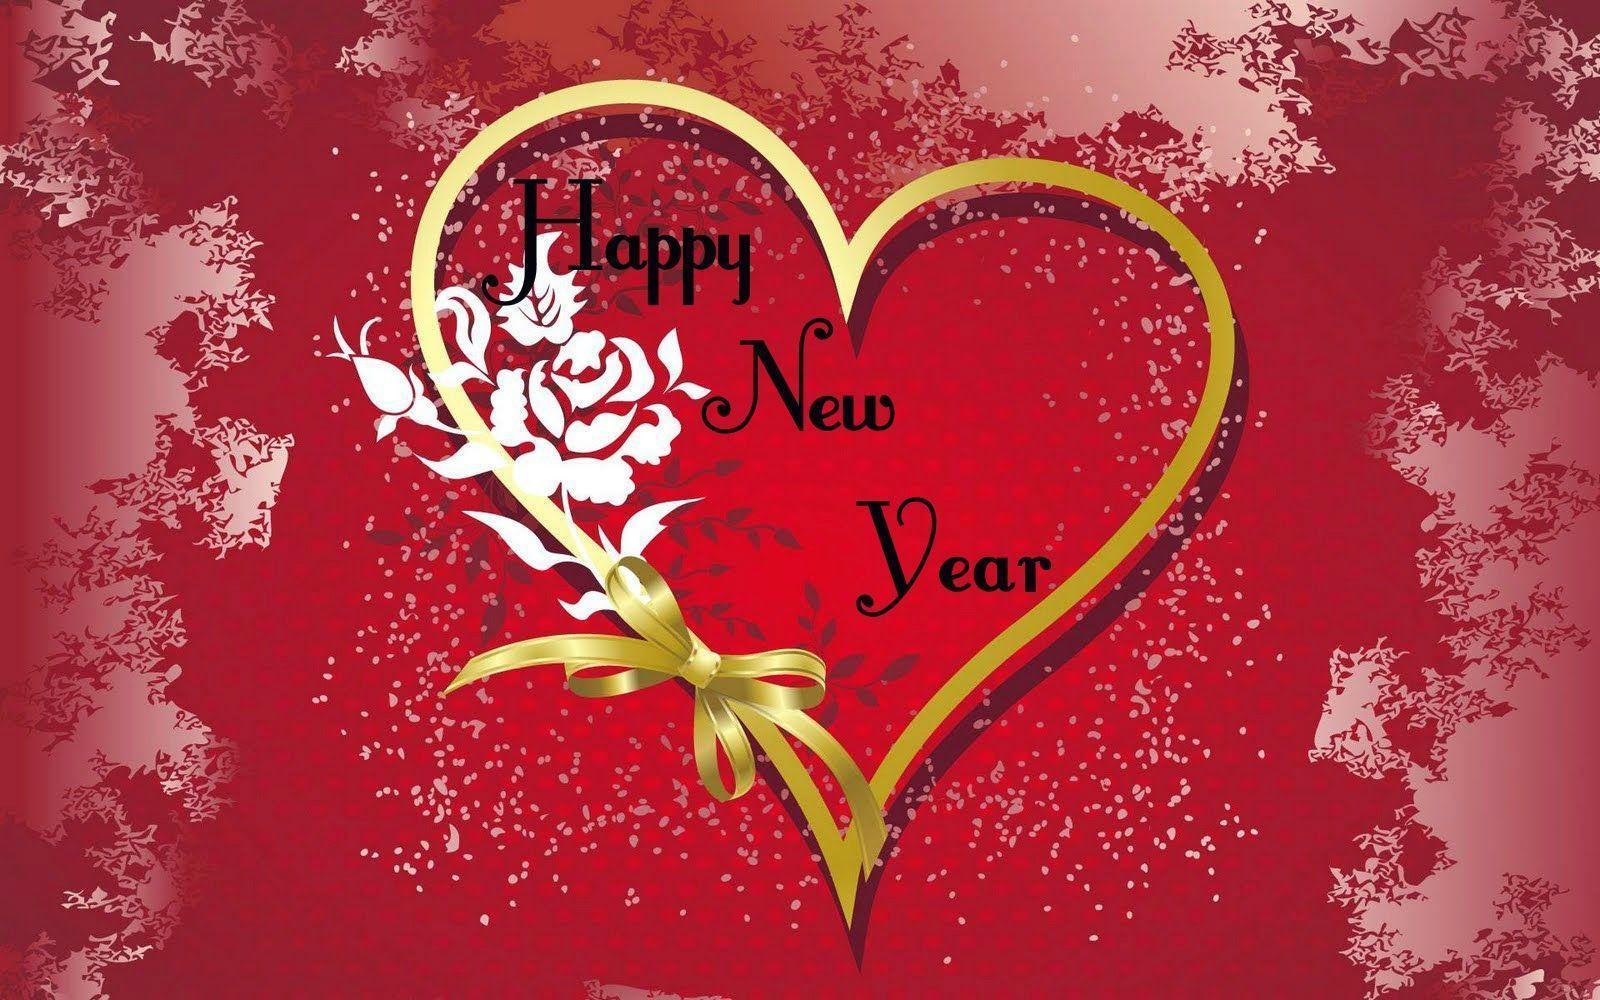 Romantic I Love You Image Wallpaper for New Year 2016 Happy